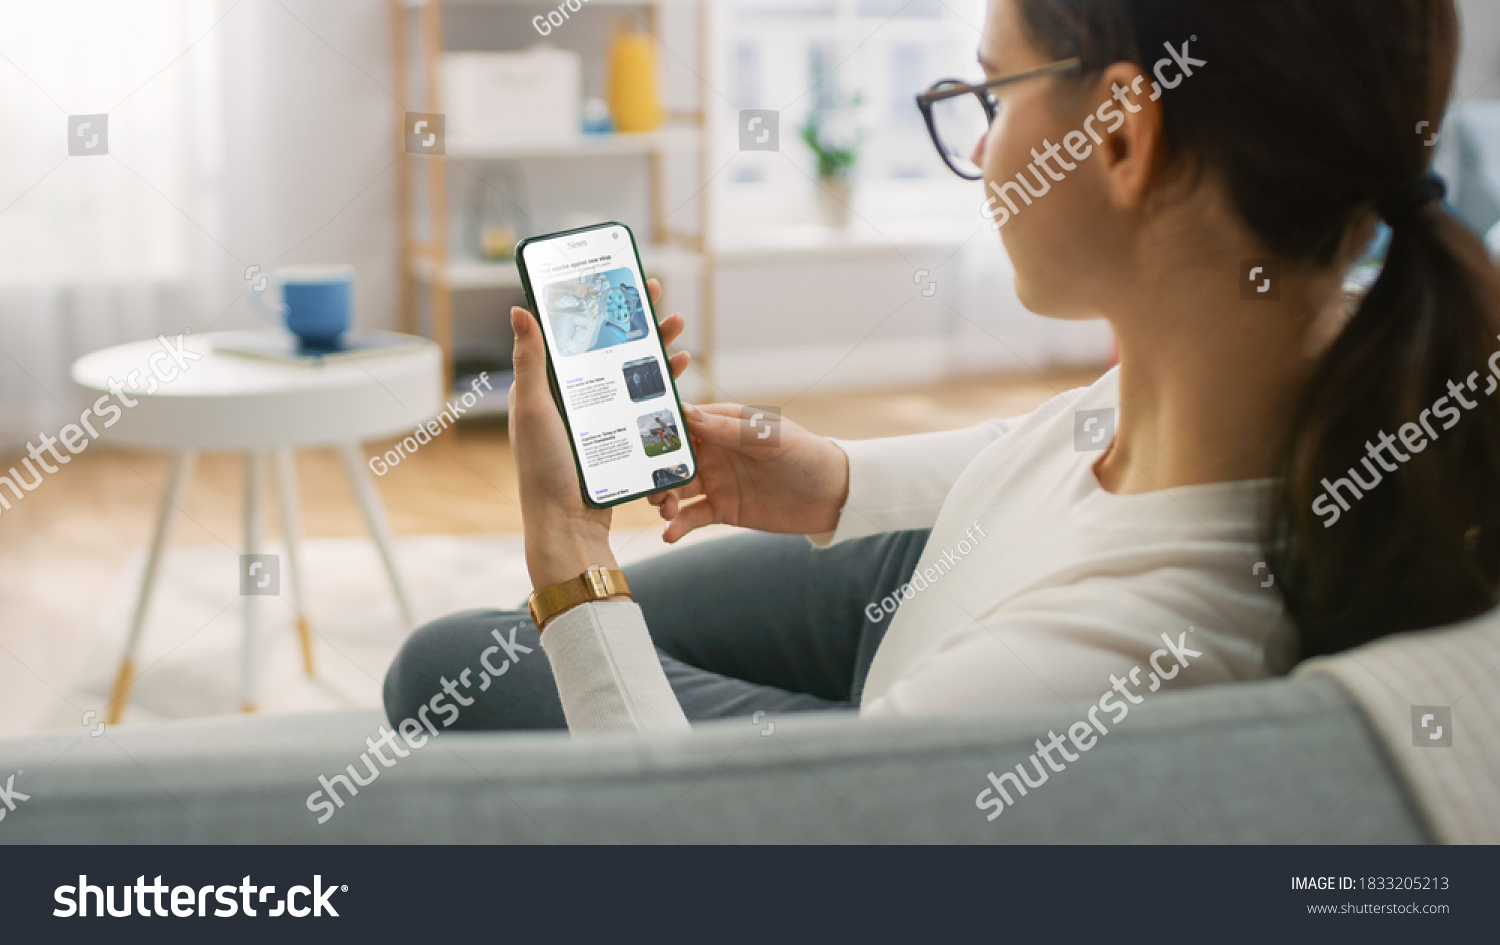 Young Woman at Home Uses Smartphone for Scrolling and Reading News about Technological Breakthroughs. She's Sitting On a Couch in Her Cozy Living Room. Over the Shoulder Shot #1833205213